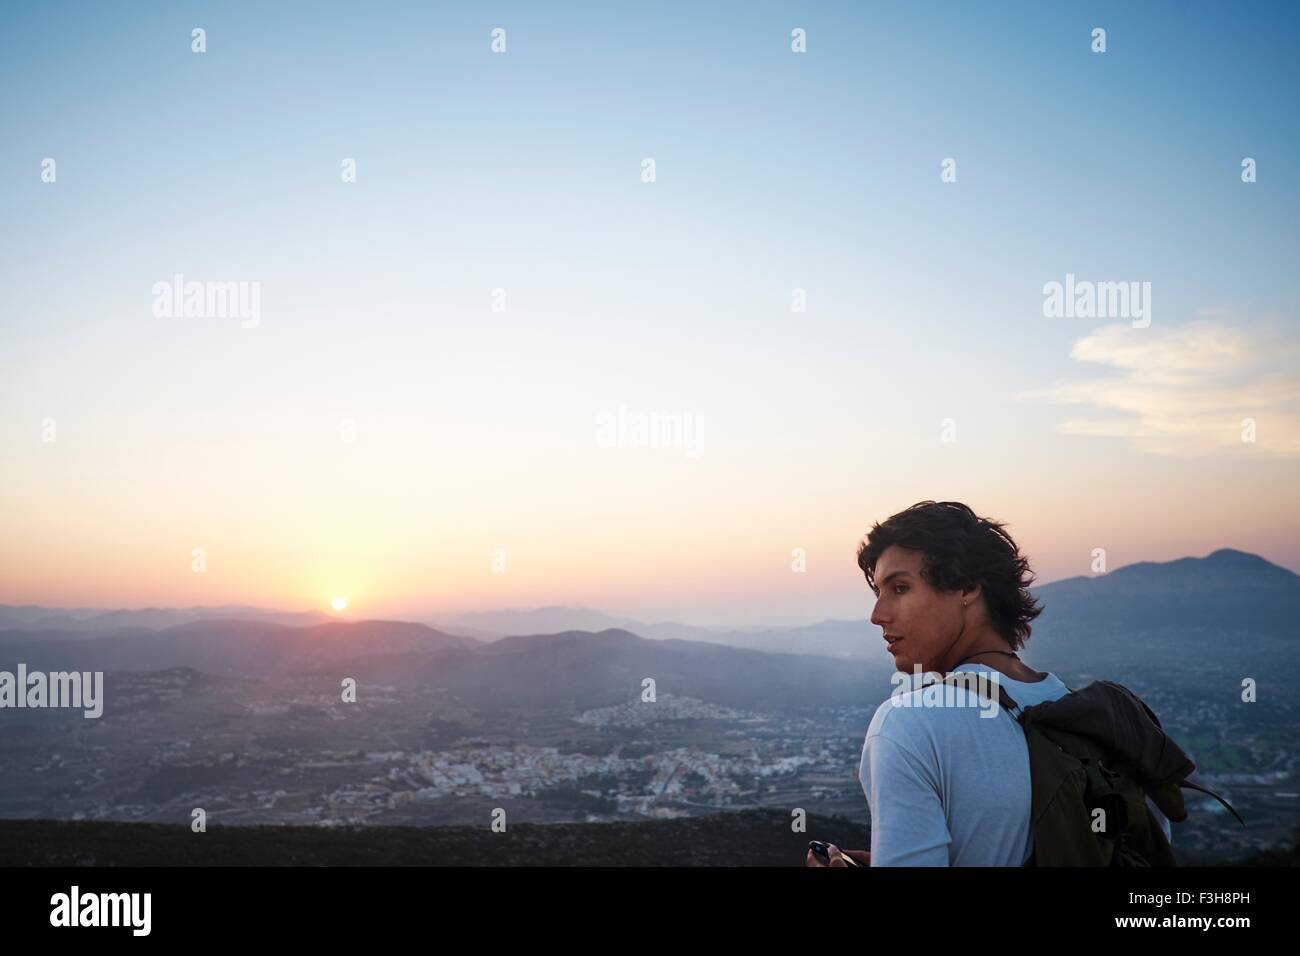 Young man looking out at landscape and sunset, Javea, Spain Stock Photo